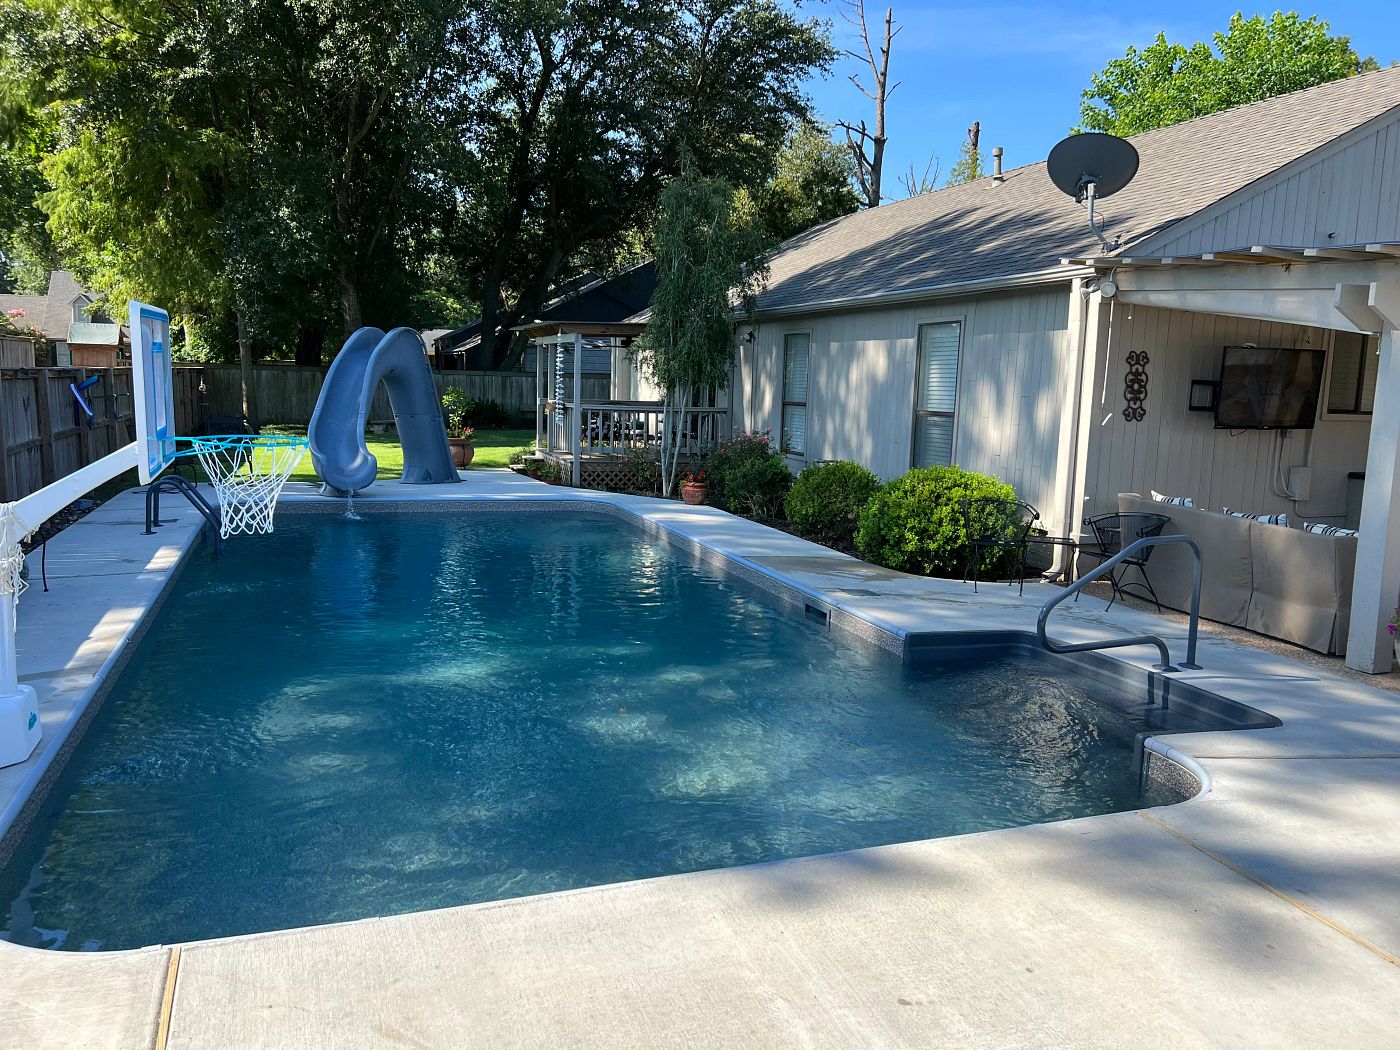 compact vinyl liner pool with waterslide in small Mississippi backyard